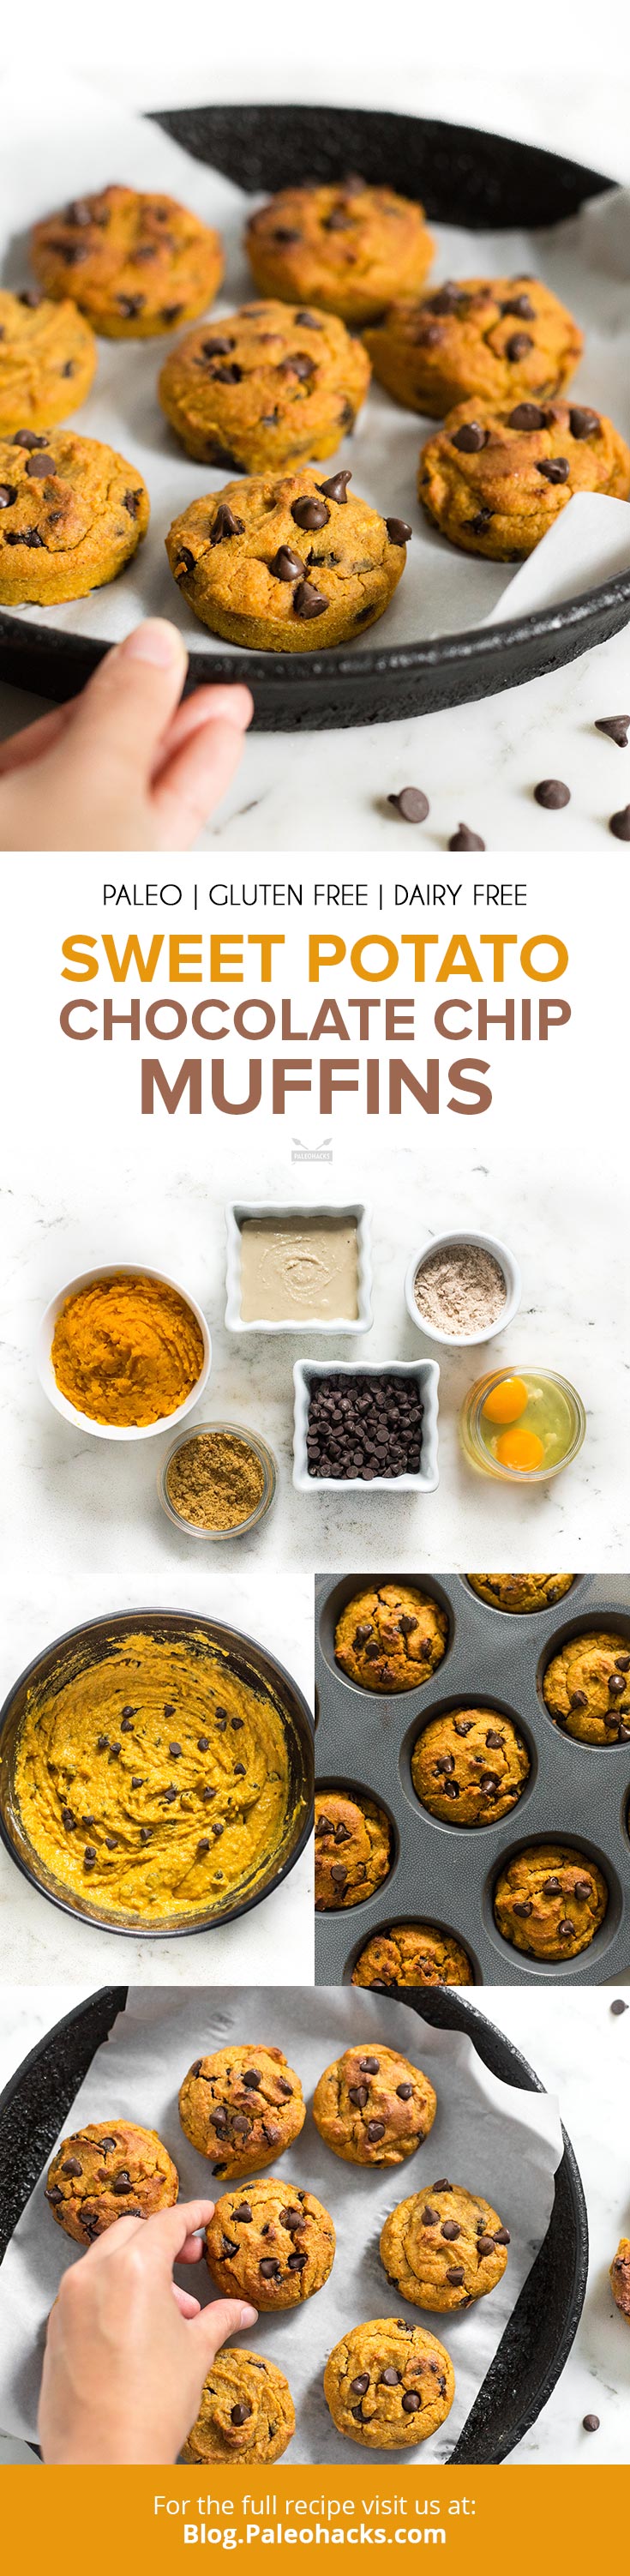 Whip up moist, chocolate chip-studded sweet potato muffins for the perfect on-the-go breakfast or afternoon snack.